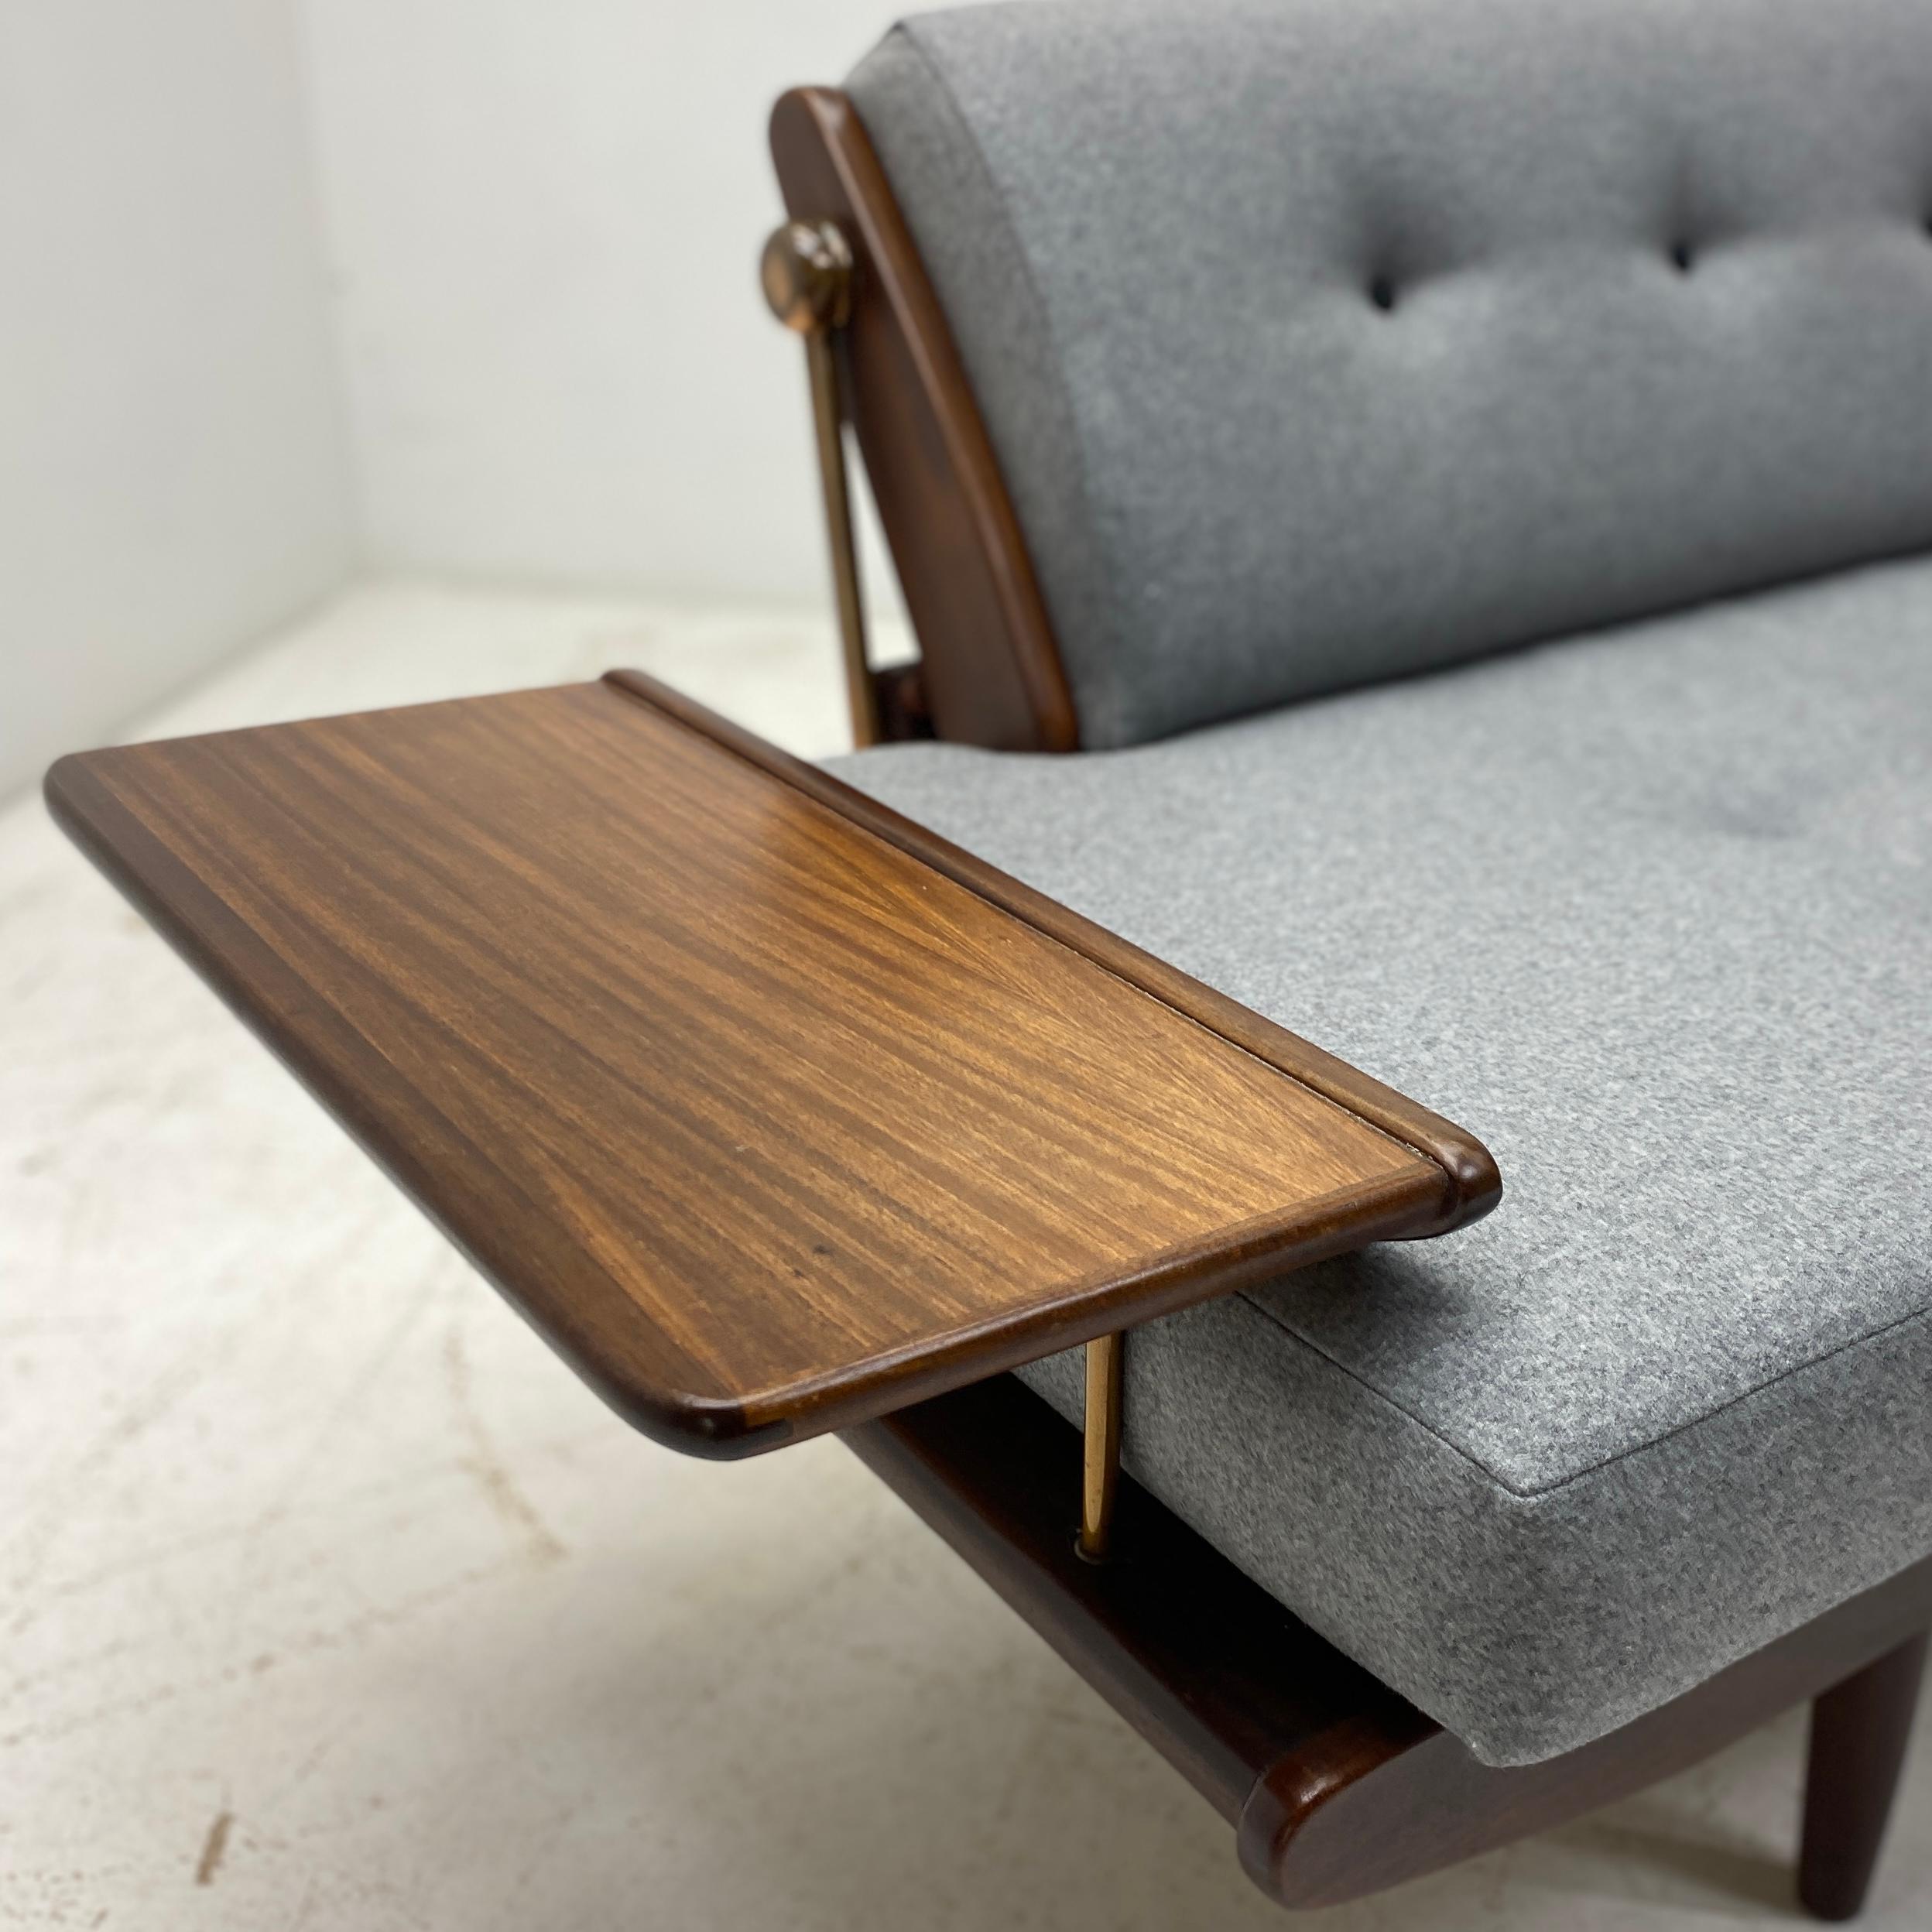 A stunning midcentury British Toothill Wentworth circa 1960. Constructed from teak afromosia & copper fittings. Originally sold through Harrods & Heals, the sofa transforms easily into a daybed with a simple up & over action to the back rest.